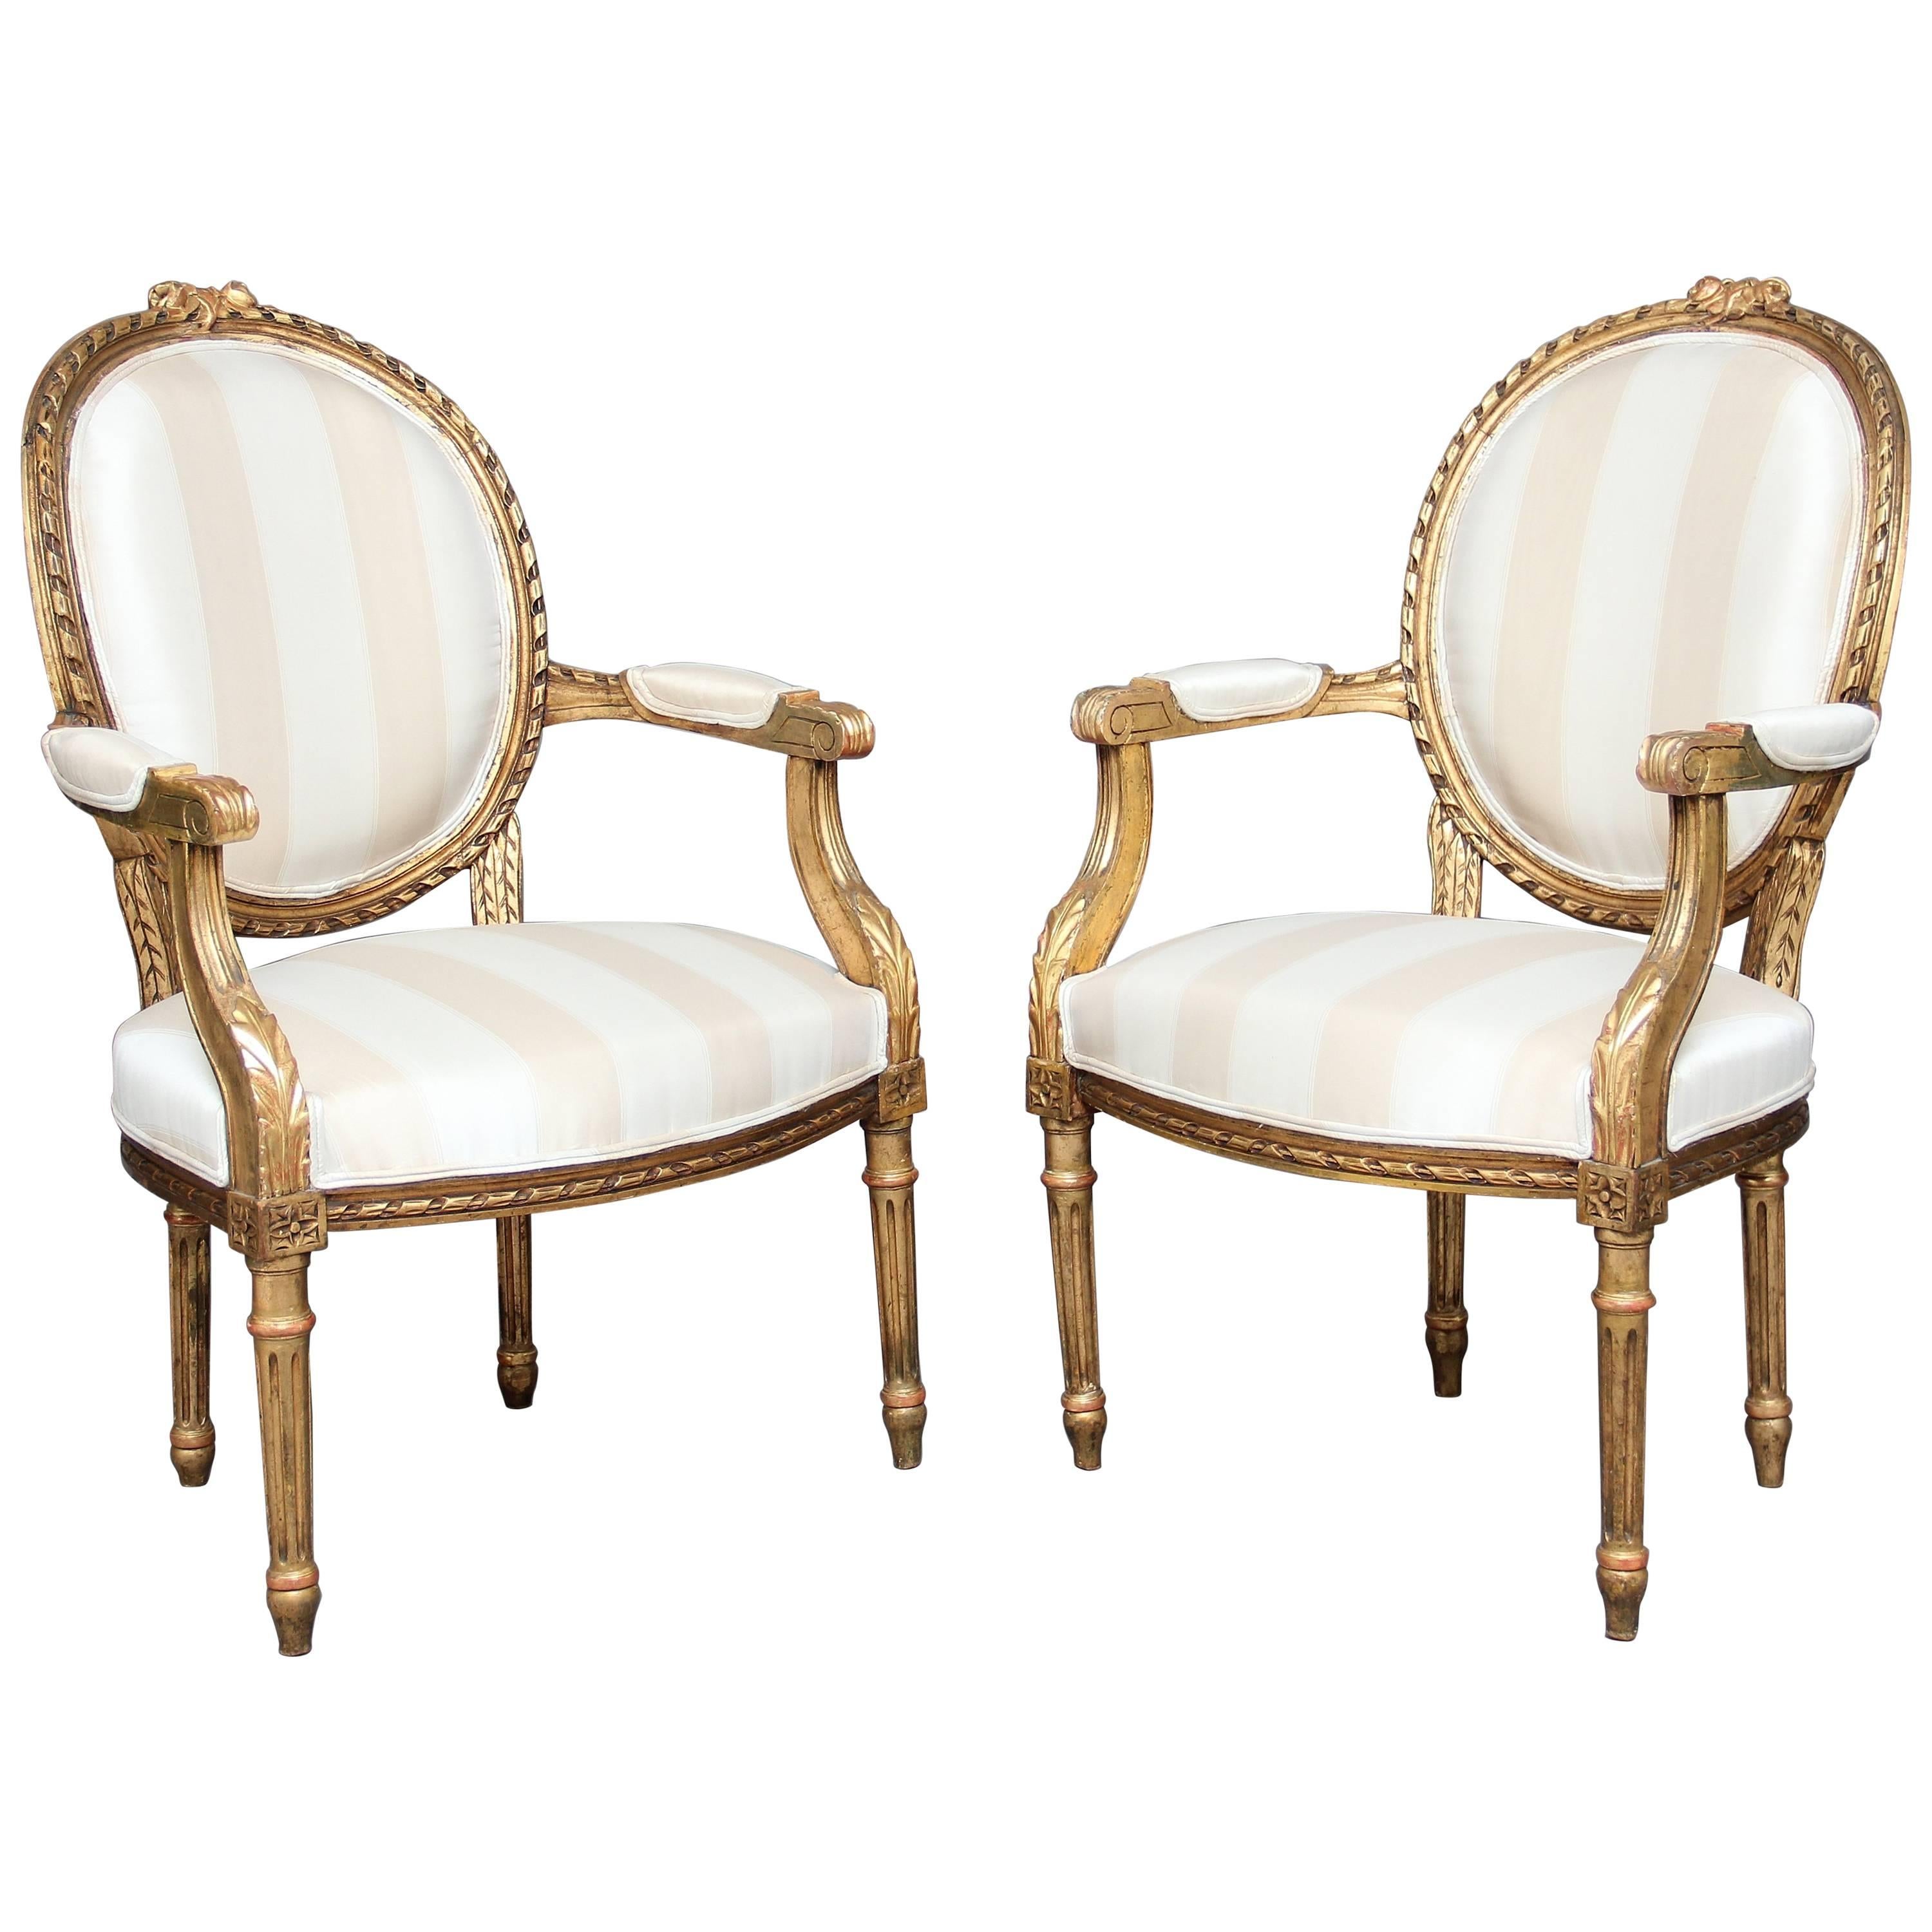 Pair of 19th Century Giltwood and Carved Armchairs